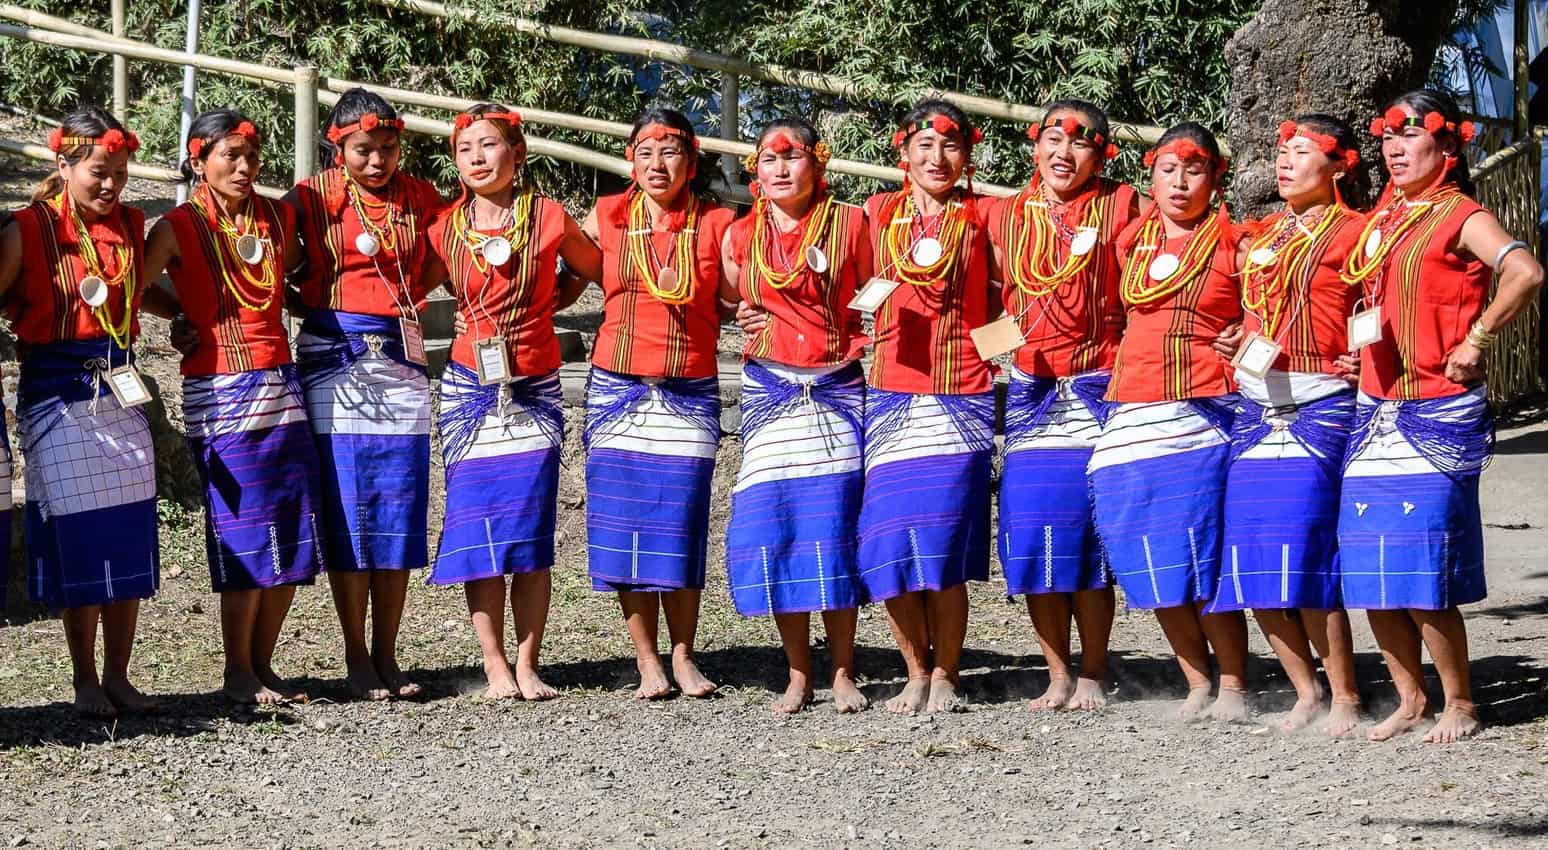 Tribal women dancing barefoot lock arms as they move in a counterclockwise circle during a demonstration at the Hornbill Festival in Nagaland, India. Donnie Sexton photos.